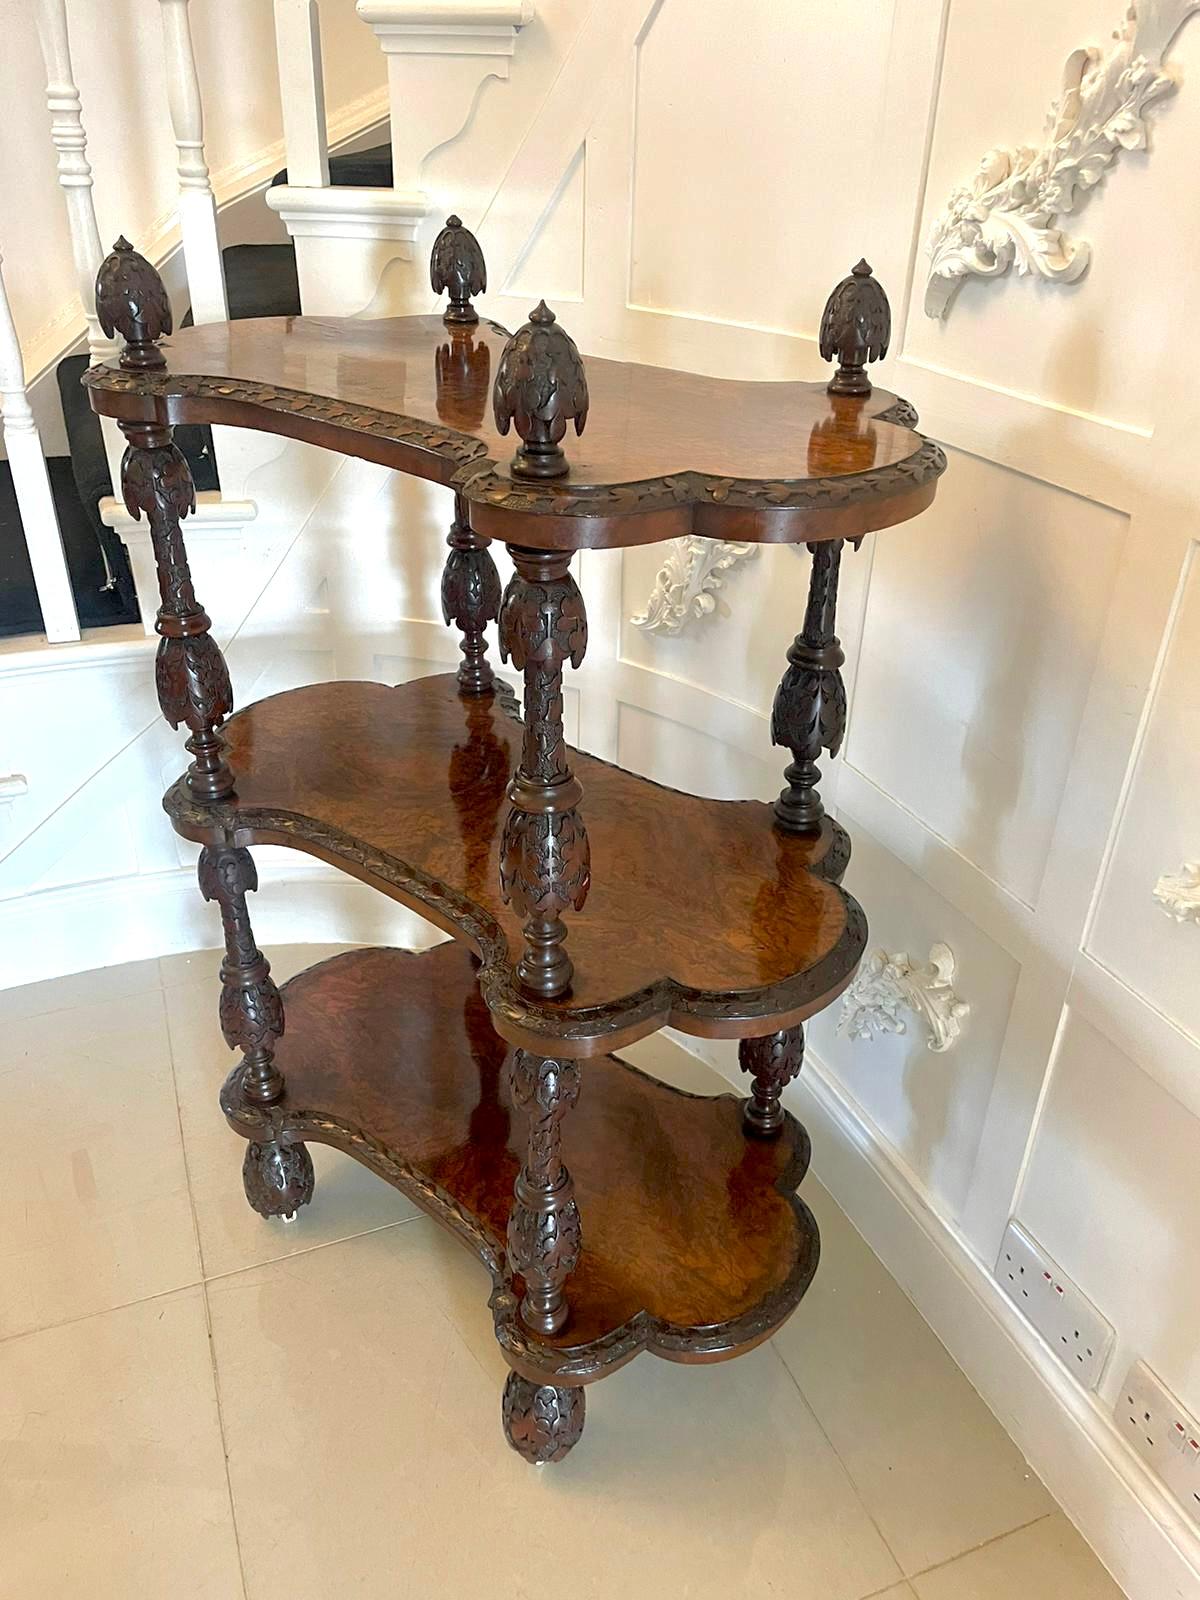 Rare Irish antique Victorian exhibition quality freestanding burr walnut carved whatnot having three serpentine shaped exhibition quality burr walnut tiers with a finely carved edge, profusely carved finals to the top united by profusely carved